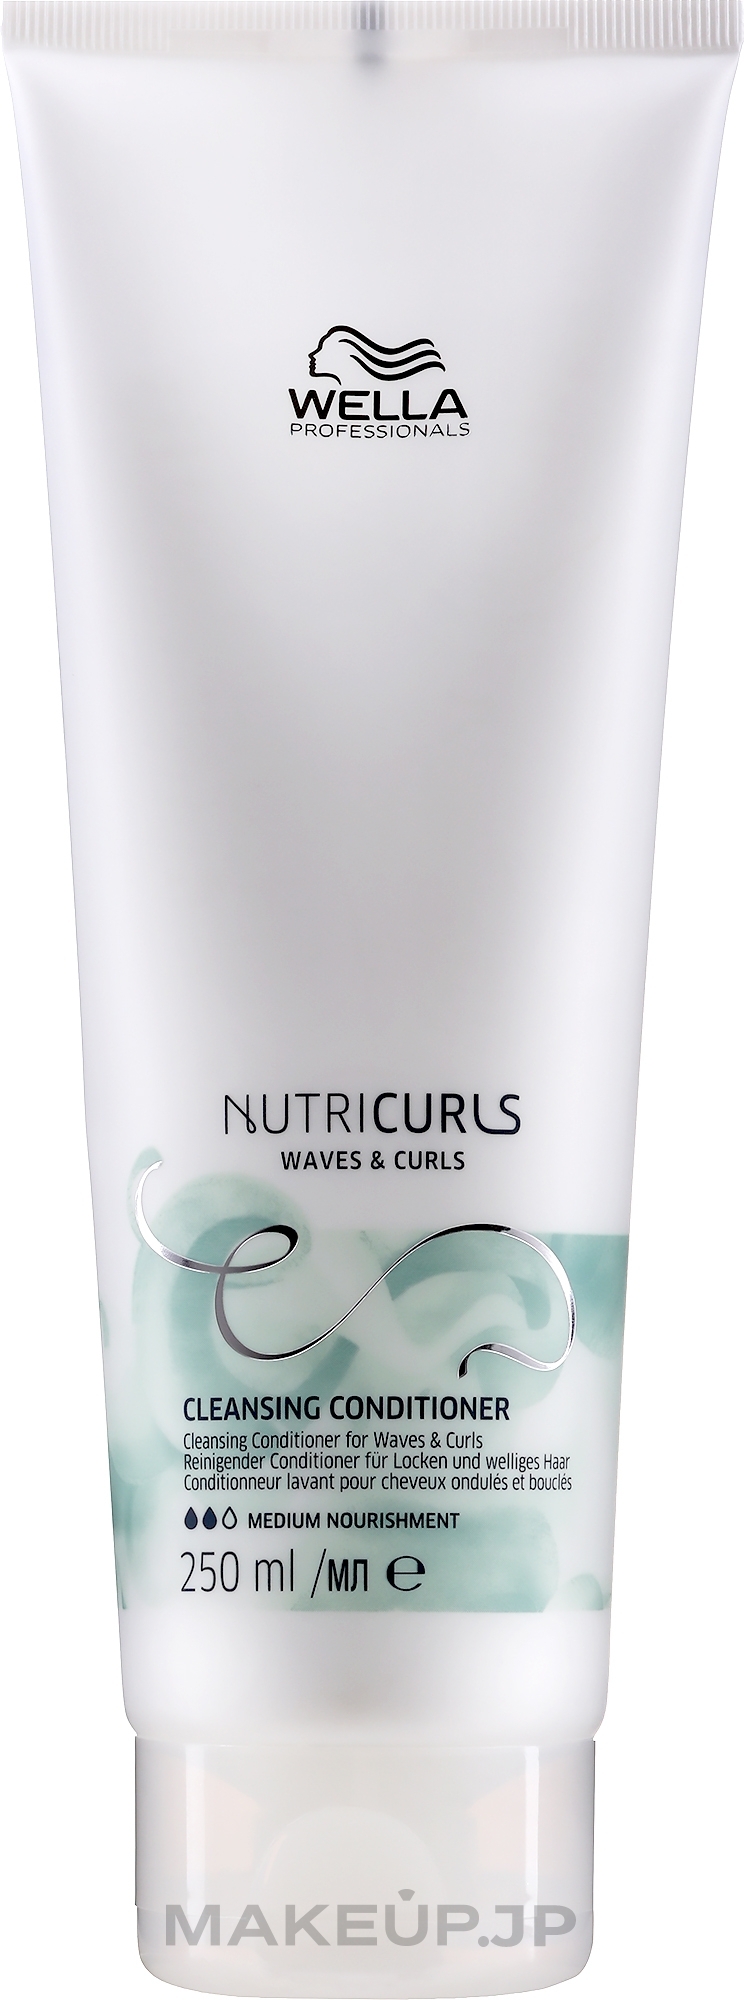 Cleansing Conditioner for Curly & Wavy Hair - Wella Professionals Nutricurls Cleansing Conditioner for Waves and Curls — photo 250 ml